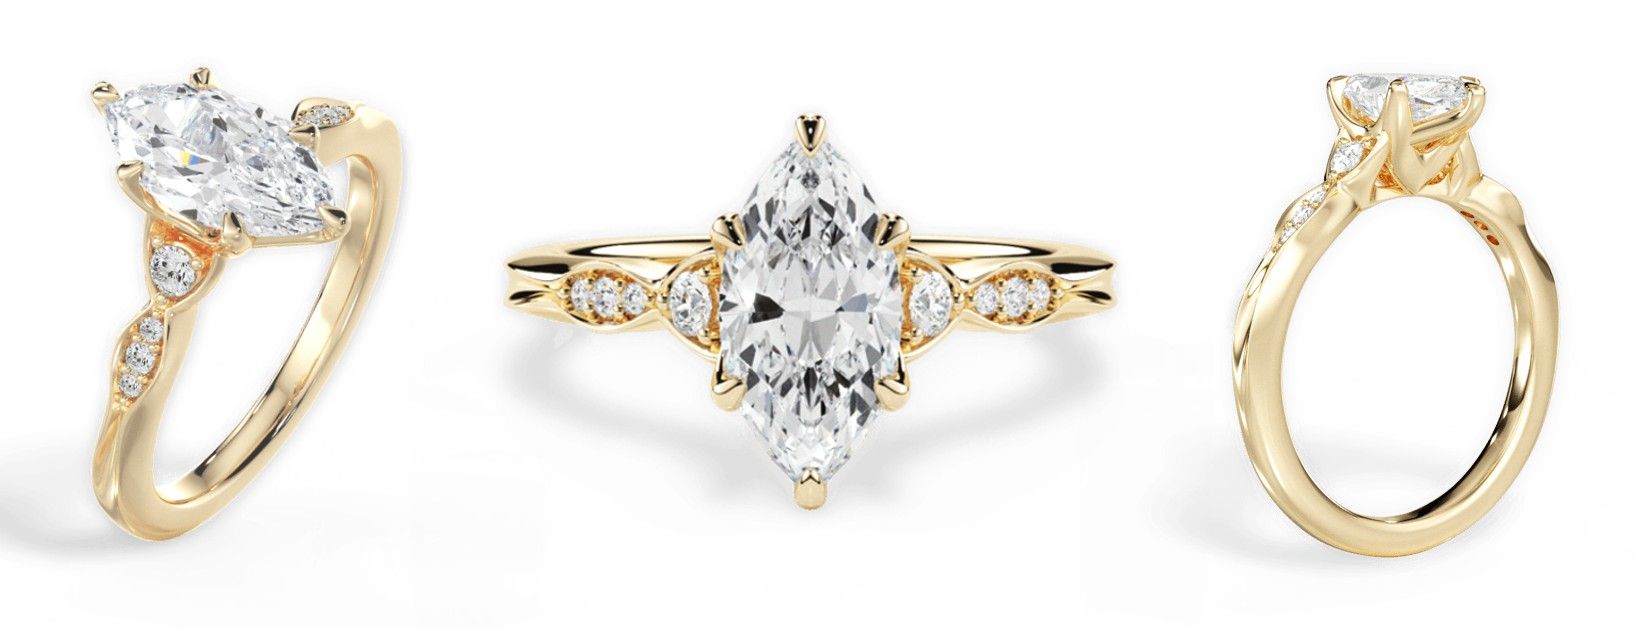 Exciting and Emerging Engagement Rings Trends—Get Inspired!  image1